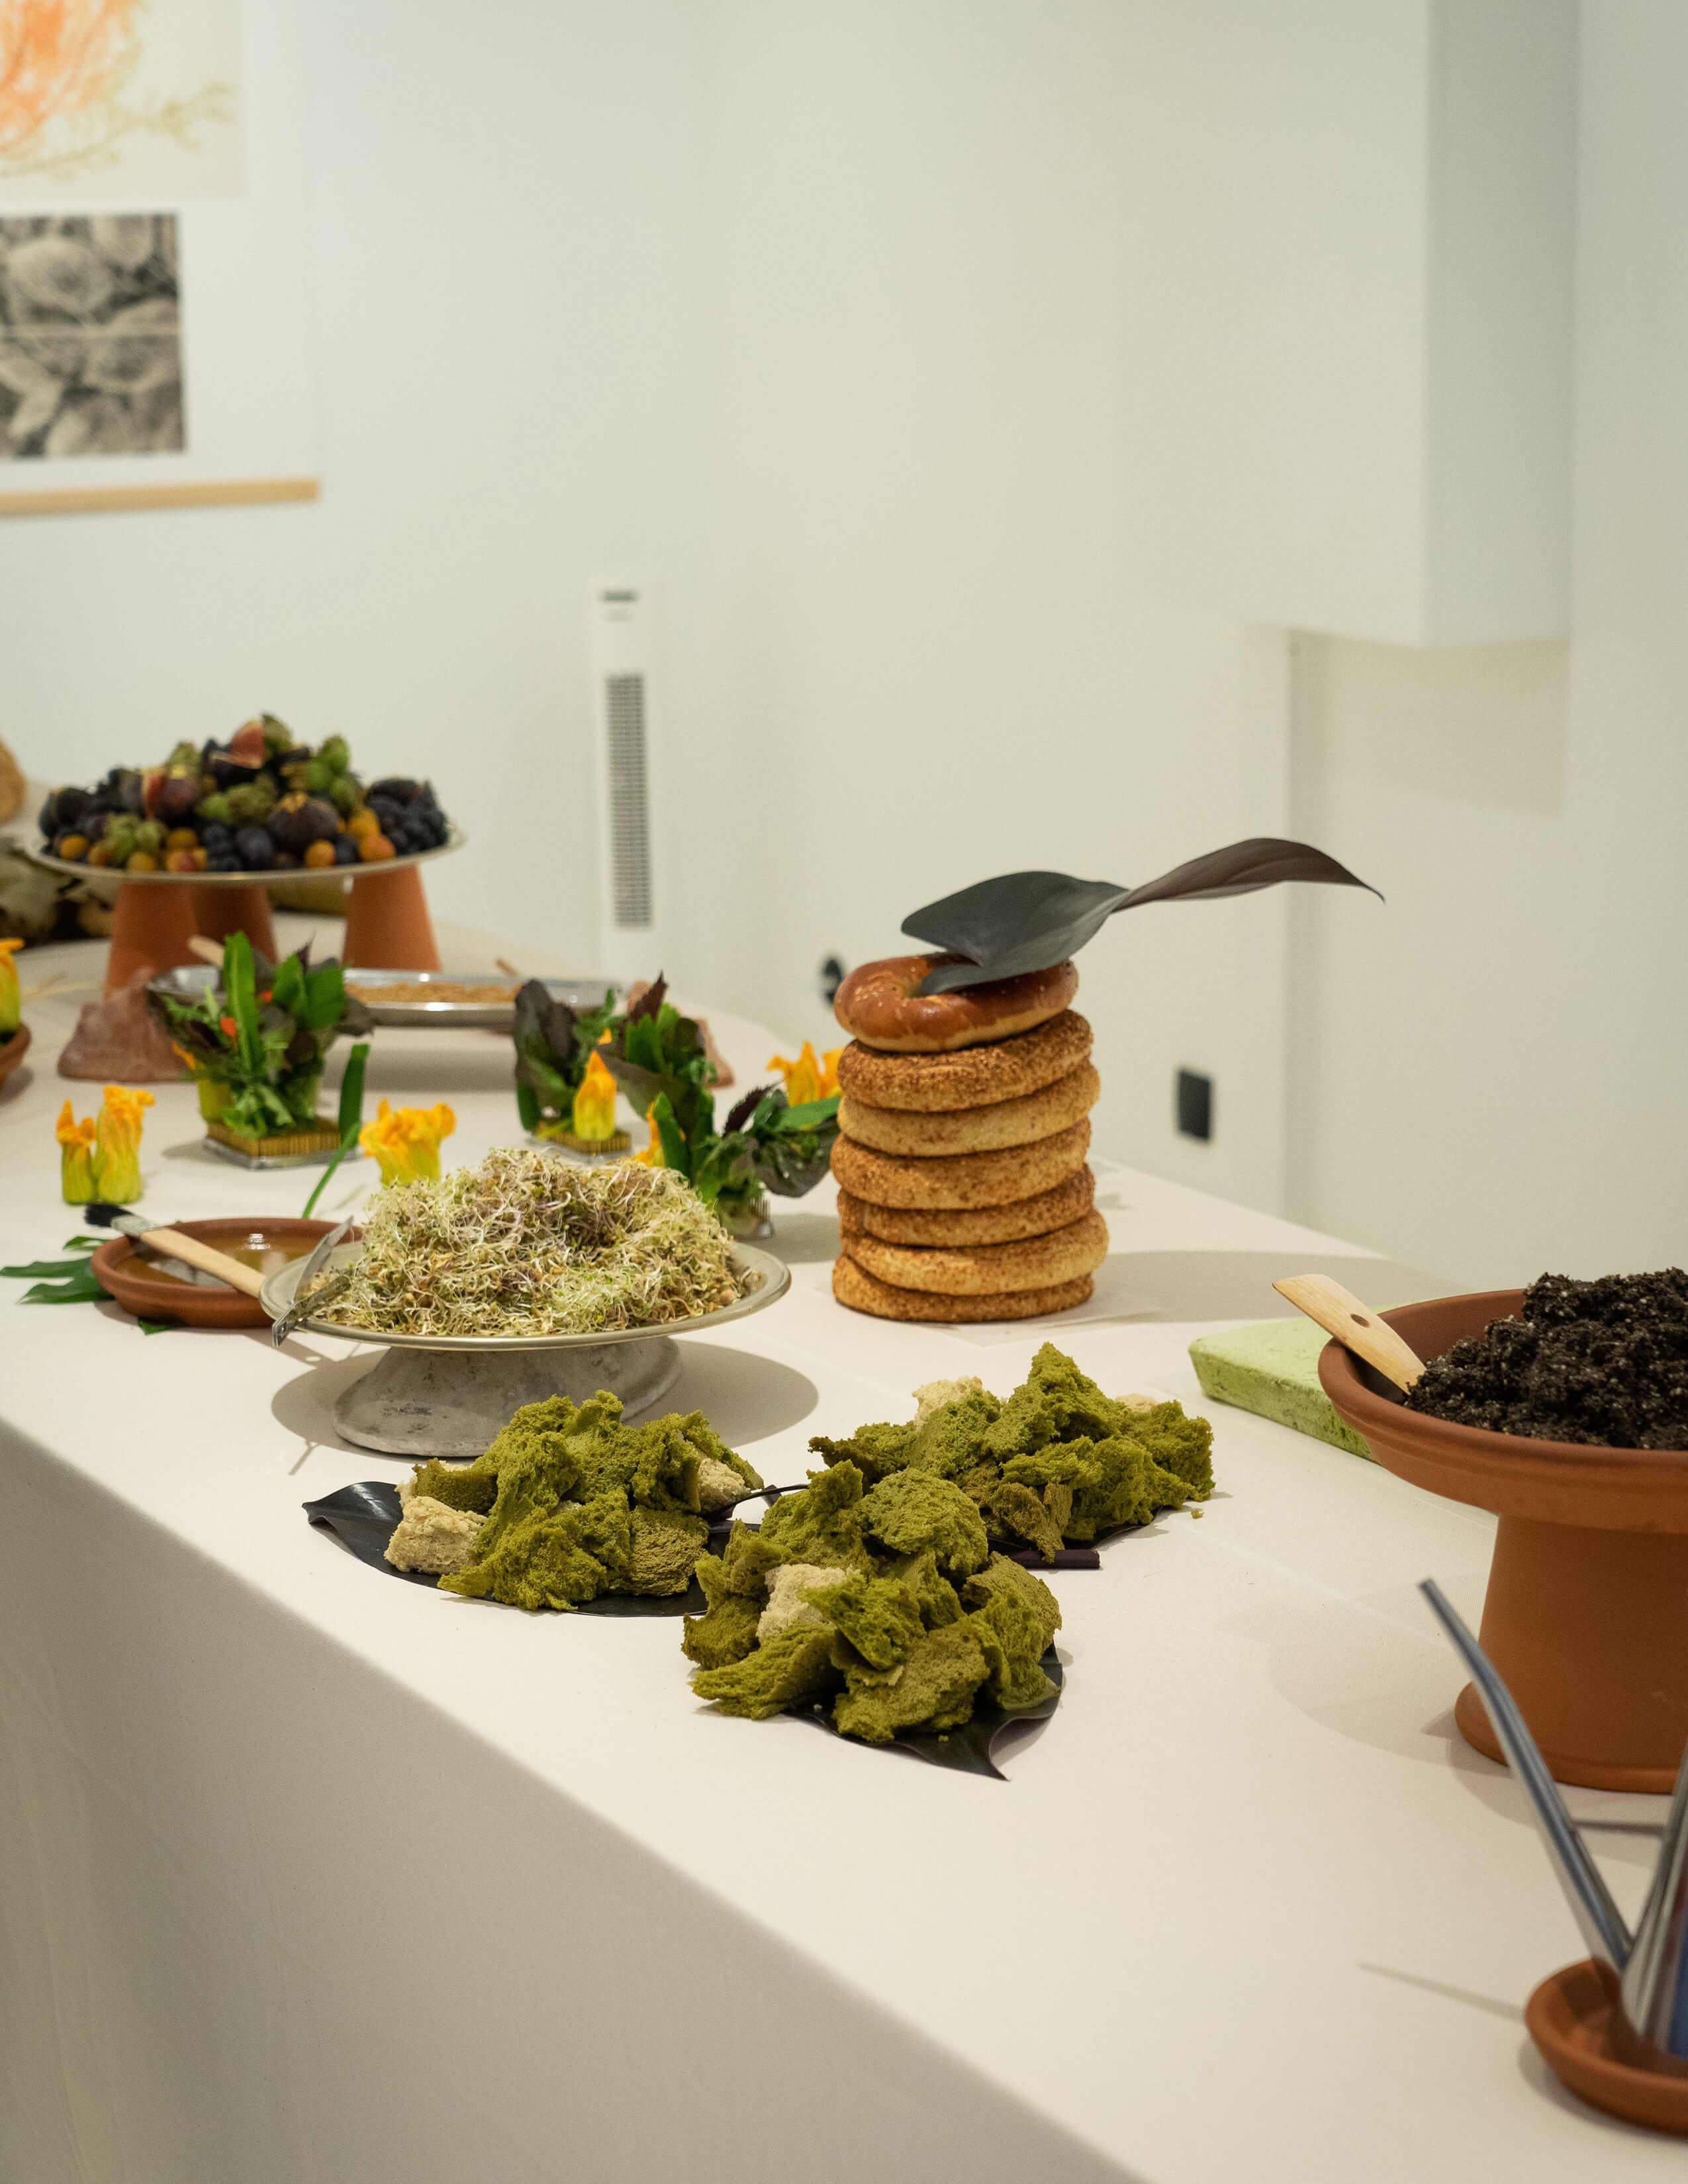 A collection of food is presented on the table.3 piles of ripped bread in green and cream, a plate of Alfalfa sprouts, a pile of bread covered with black and white sesame a piece of dark leaves on the top and many more.